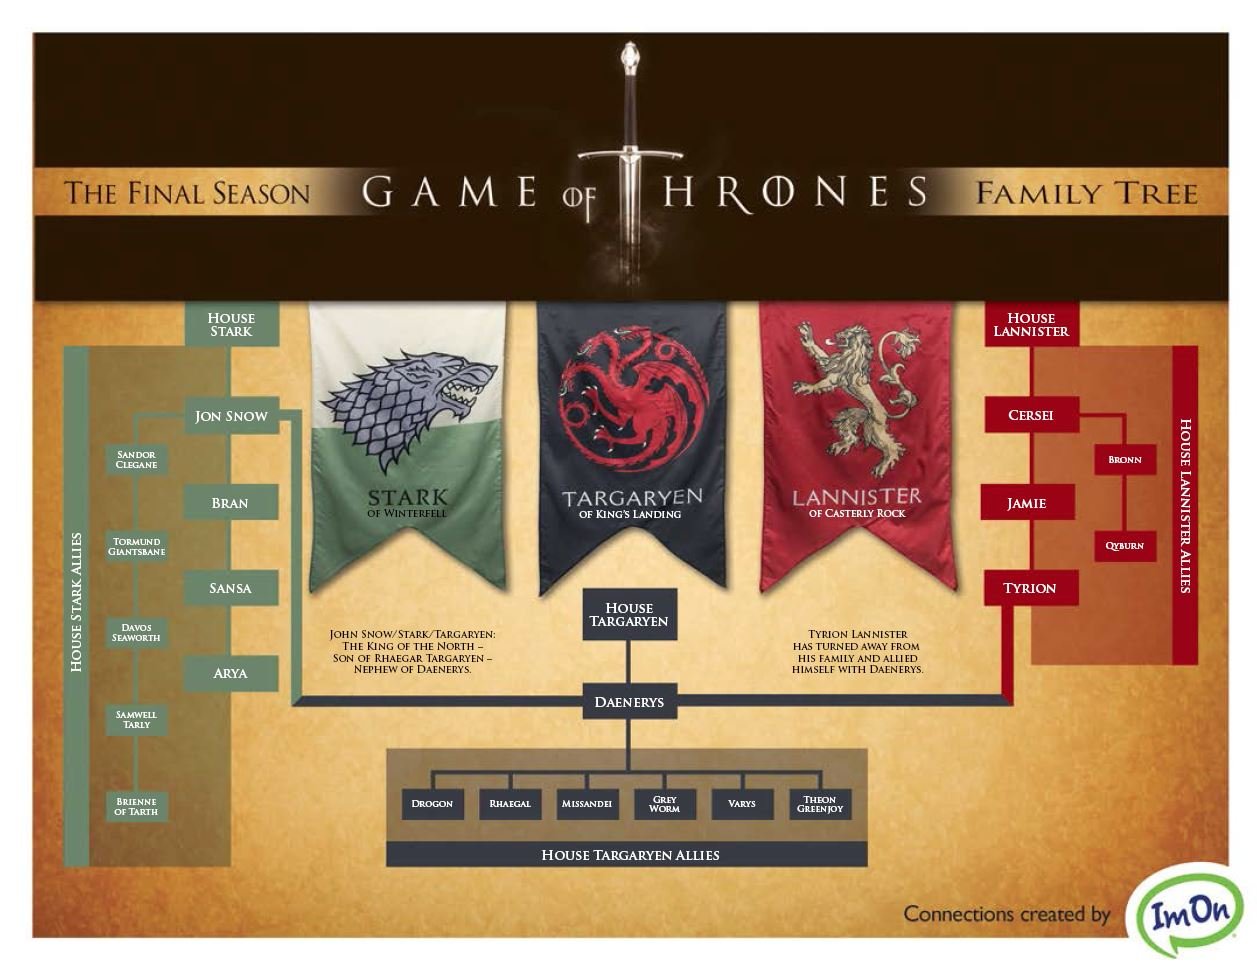 The Game Of Thrones Family Tree